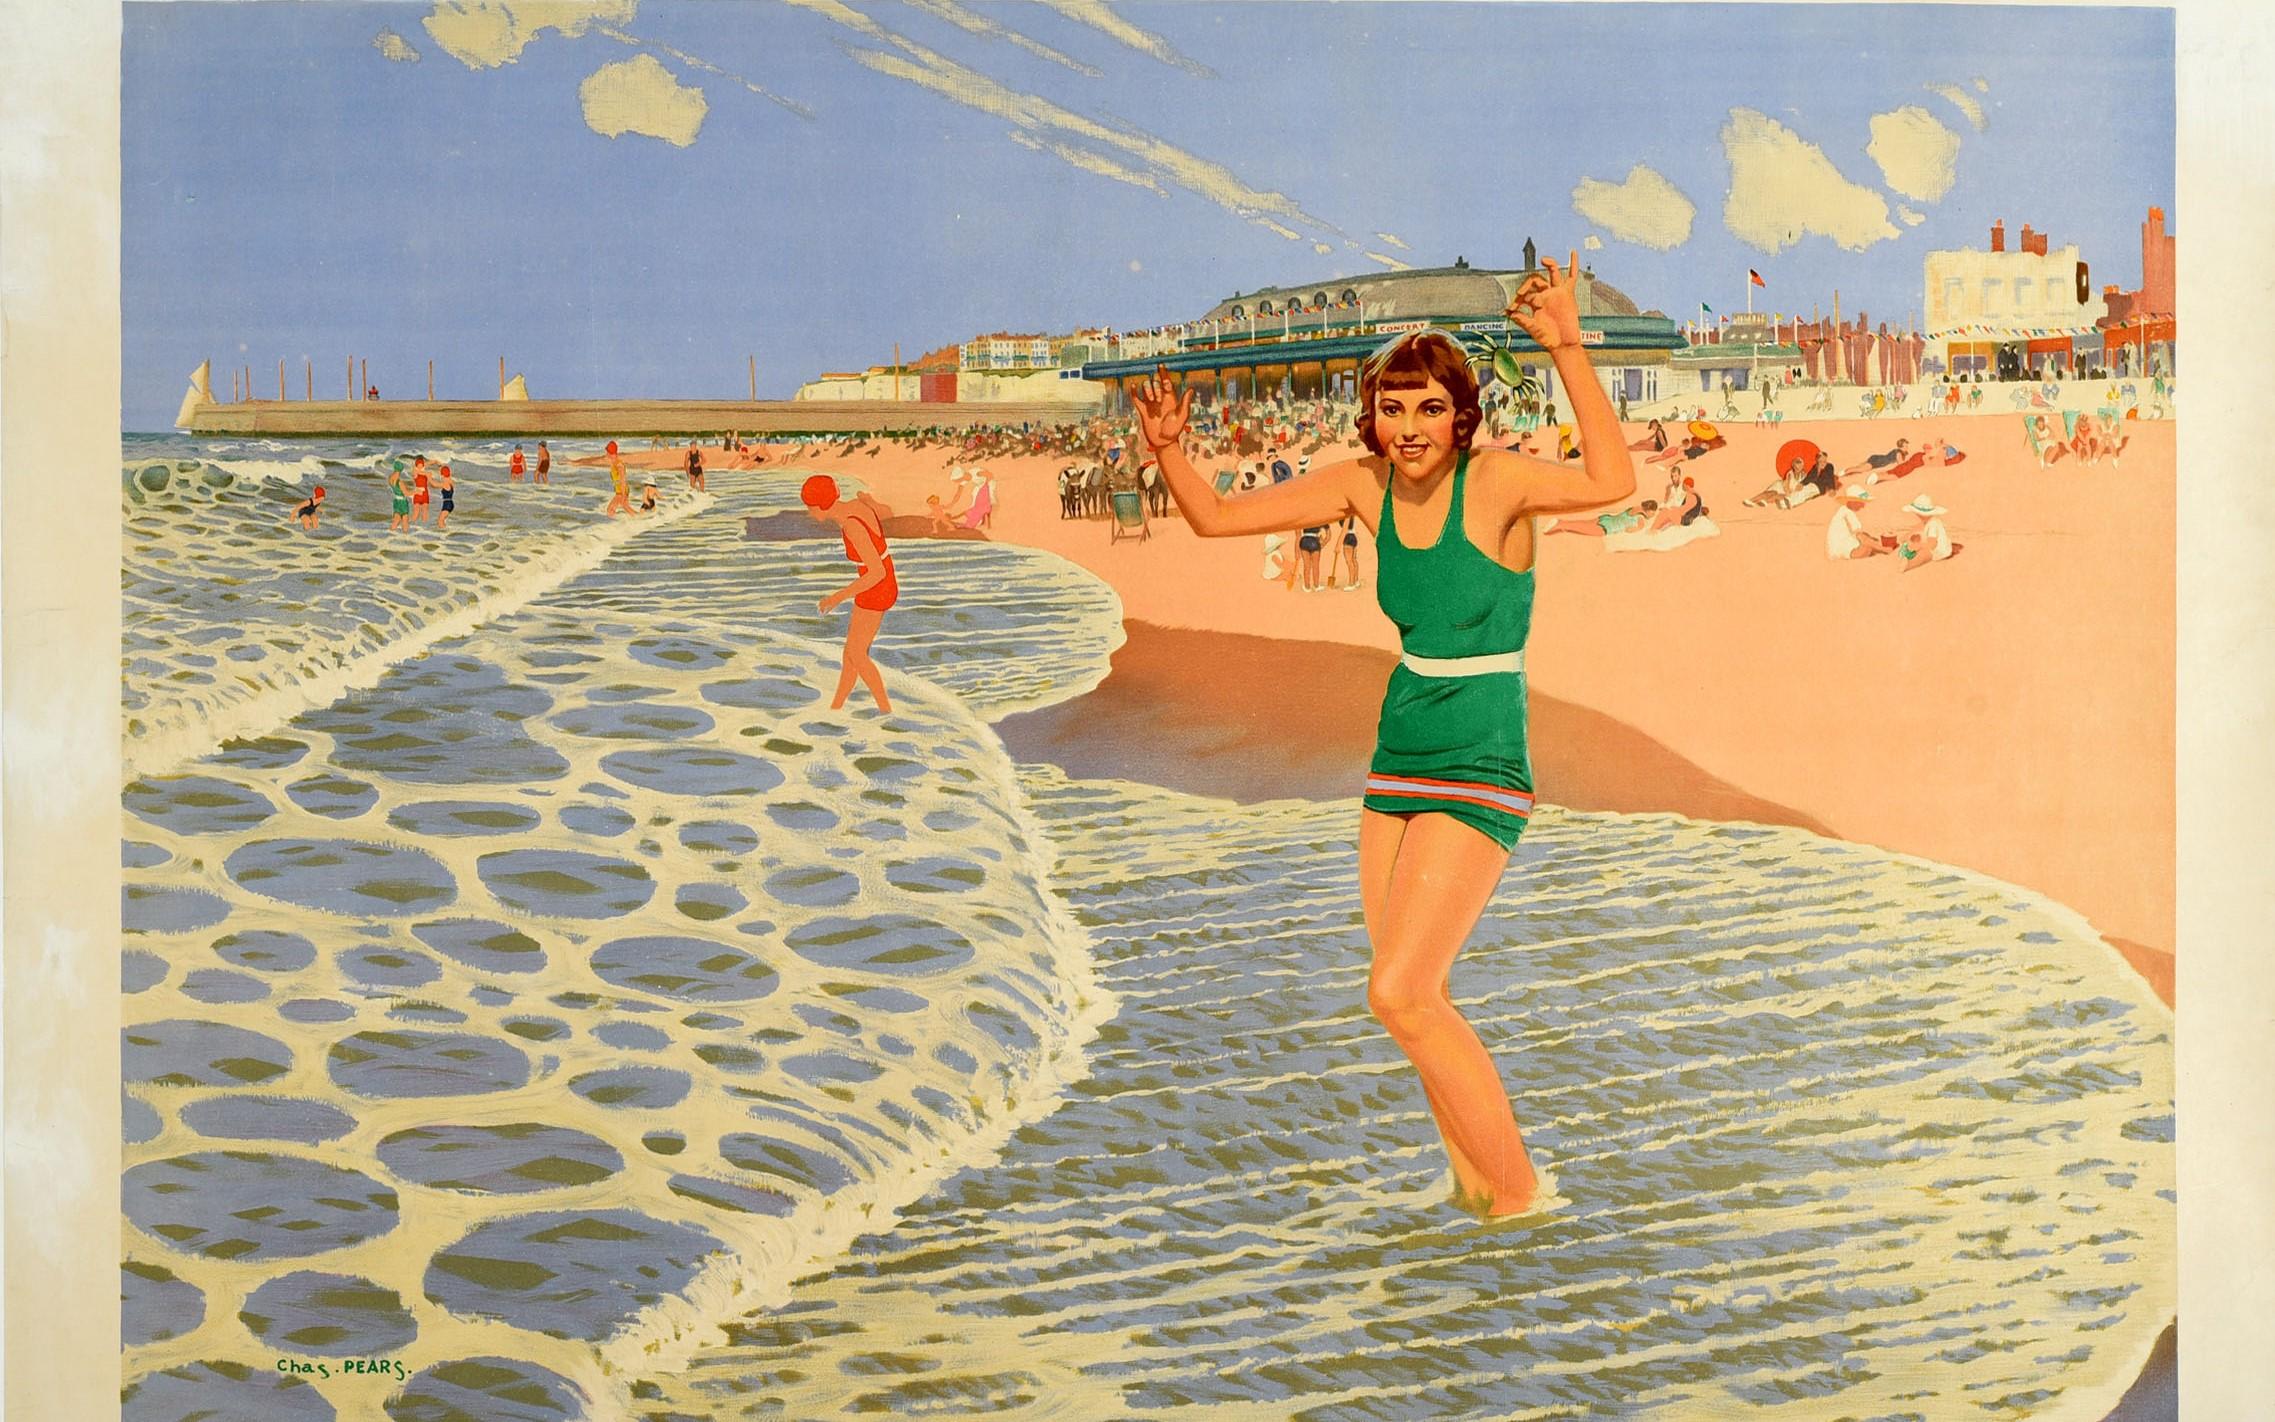 Original vintage travel poster for Ramsgate on the sunshine coast of Kent Guide post free from Town Clerk Corridor expresses Cheap fares by Southern Railway Sands and Sun Health and Fun - featuring stunning artwork by the notable artist Charles